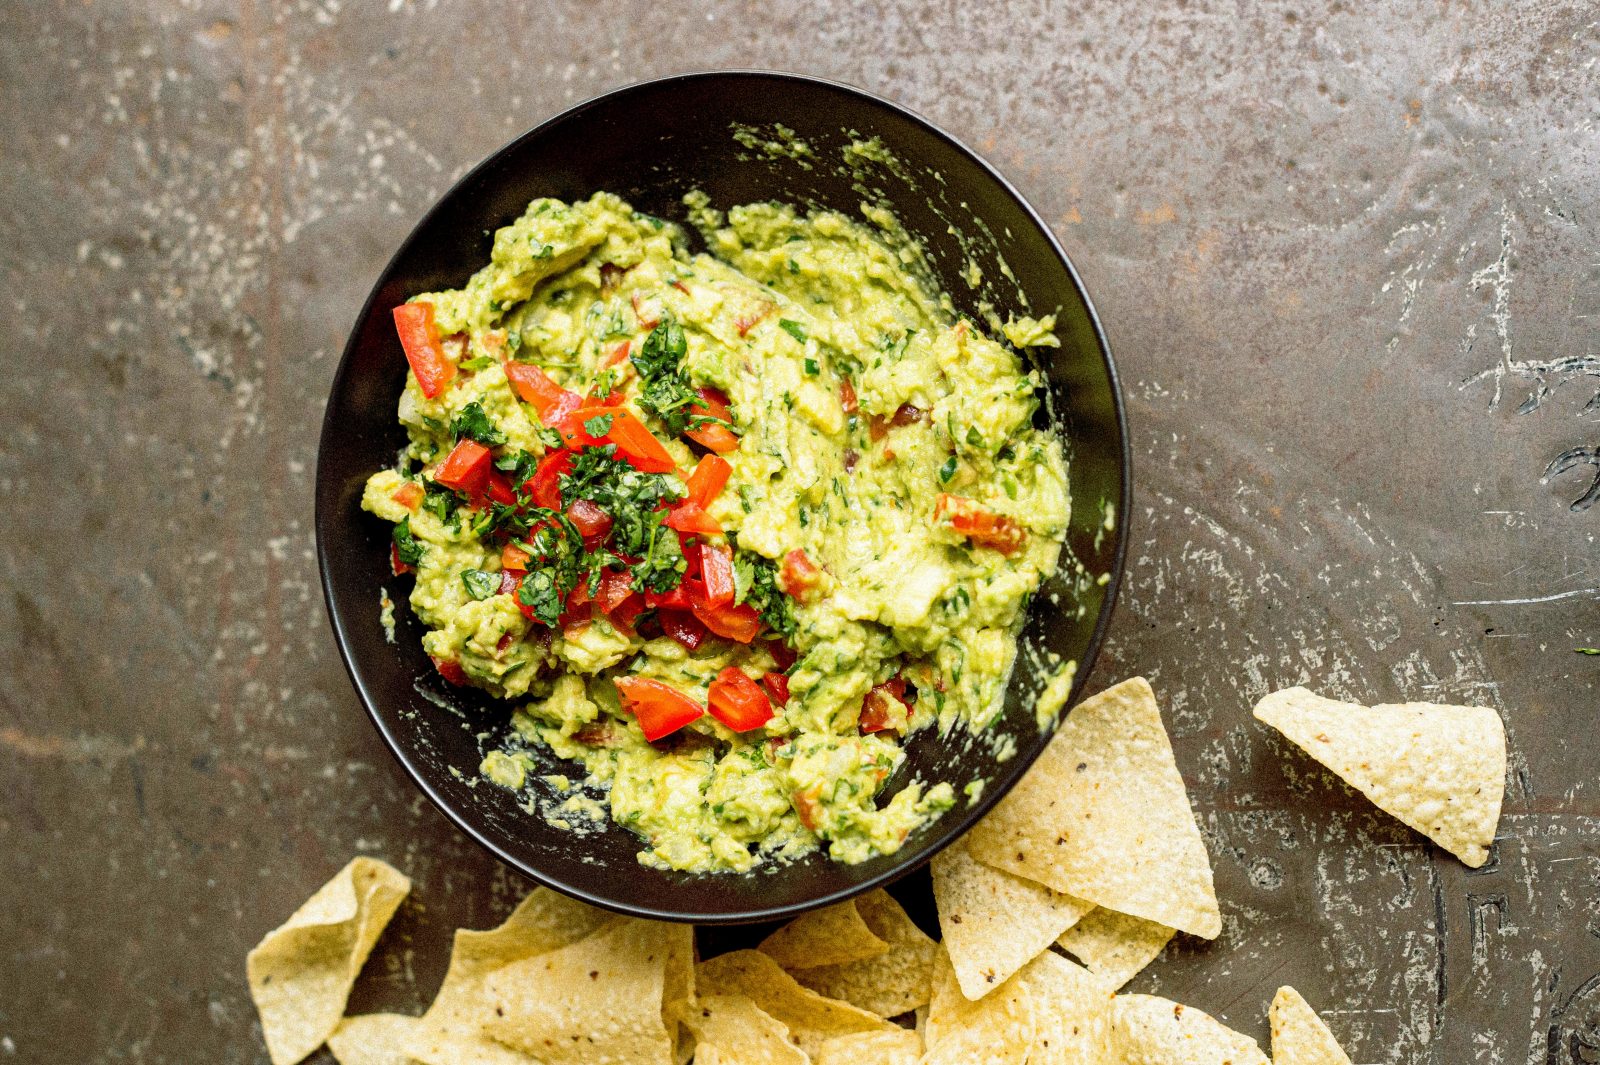 Best Central Mexican Guacamole Recipe - How to Make Central Mexican  Guacamole